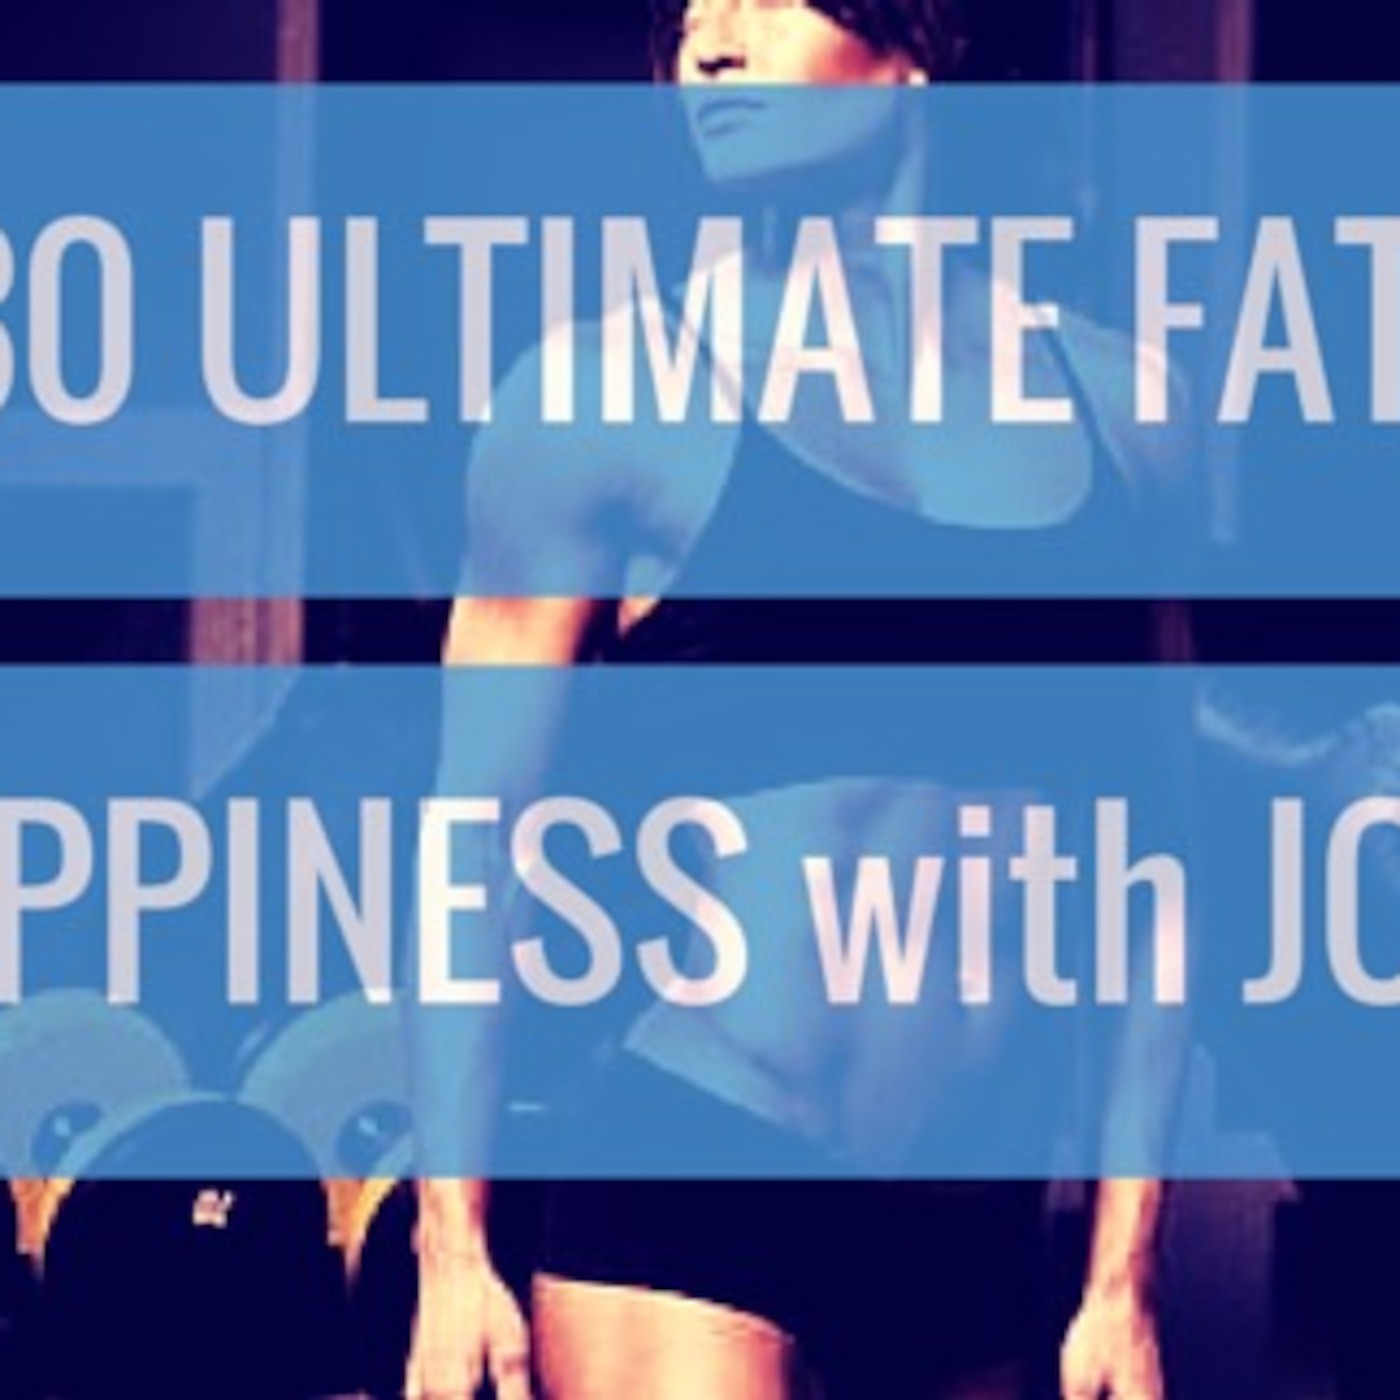 #30 Ultimate Fat Loss & Happiness with JC Deen